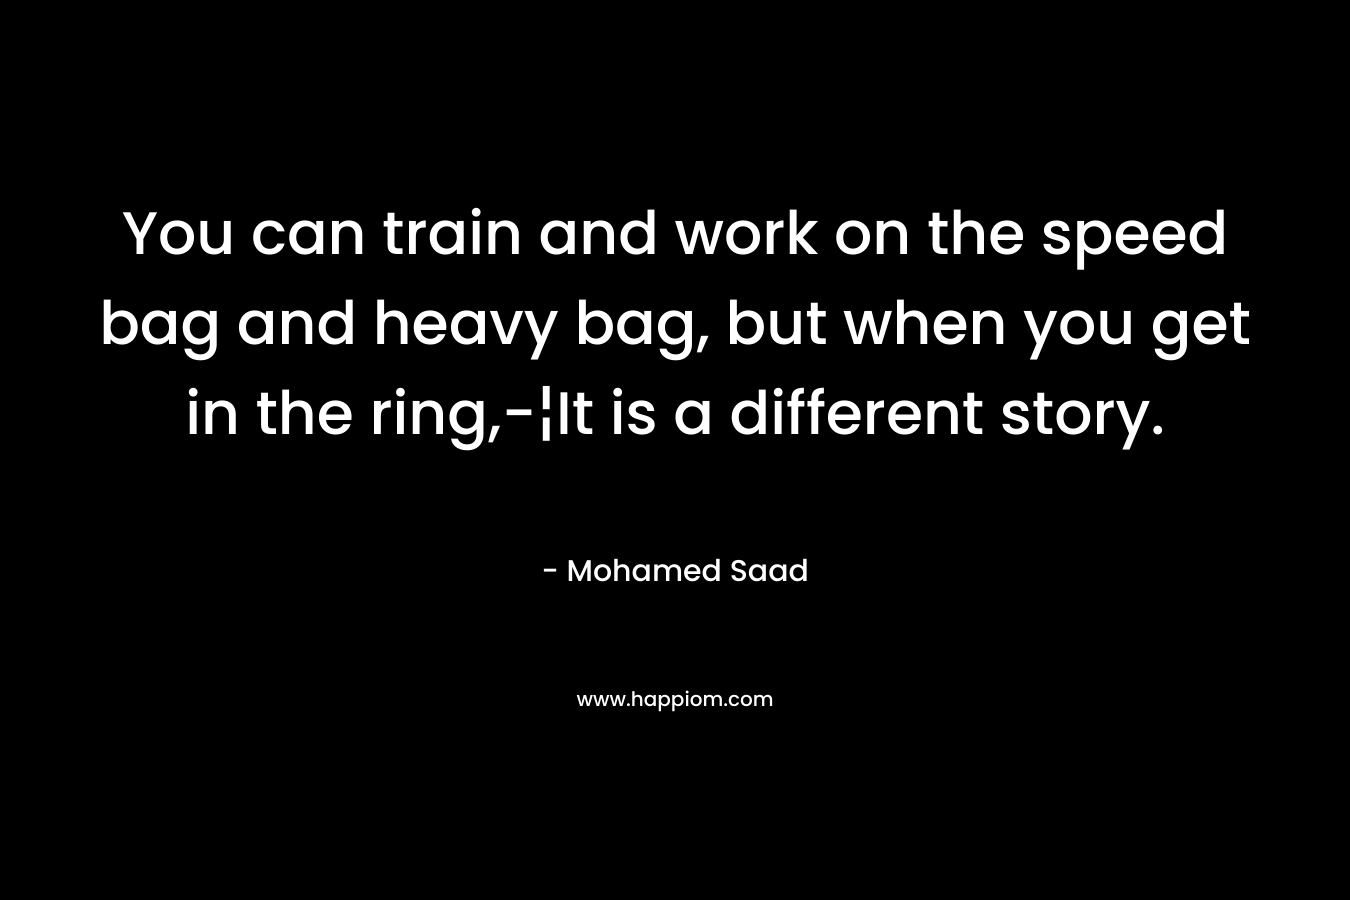 You can train and work on the speed bag and heavy bag, but when you get in the ring,-¦It is a different story. – Mohamed Saad